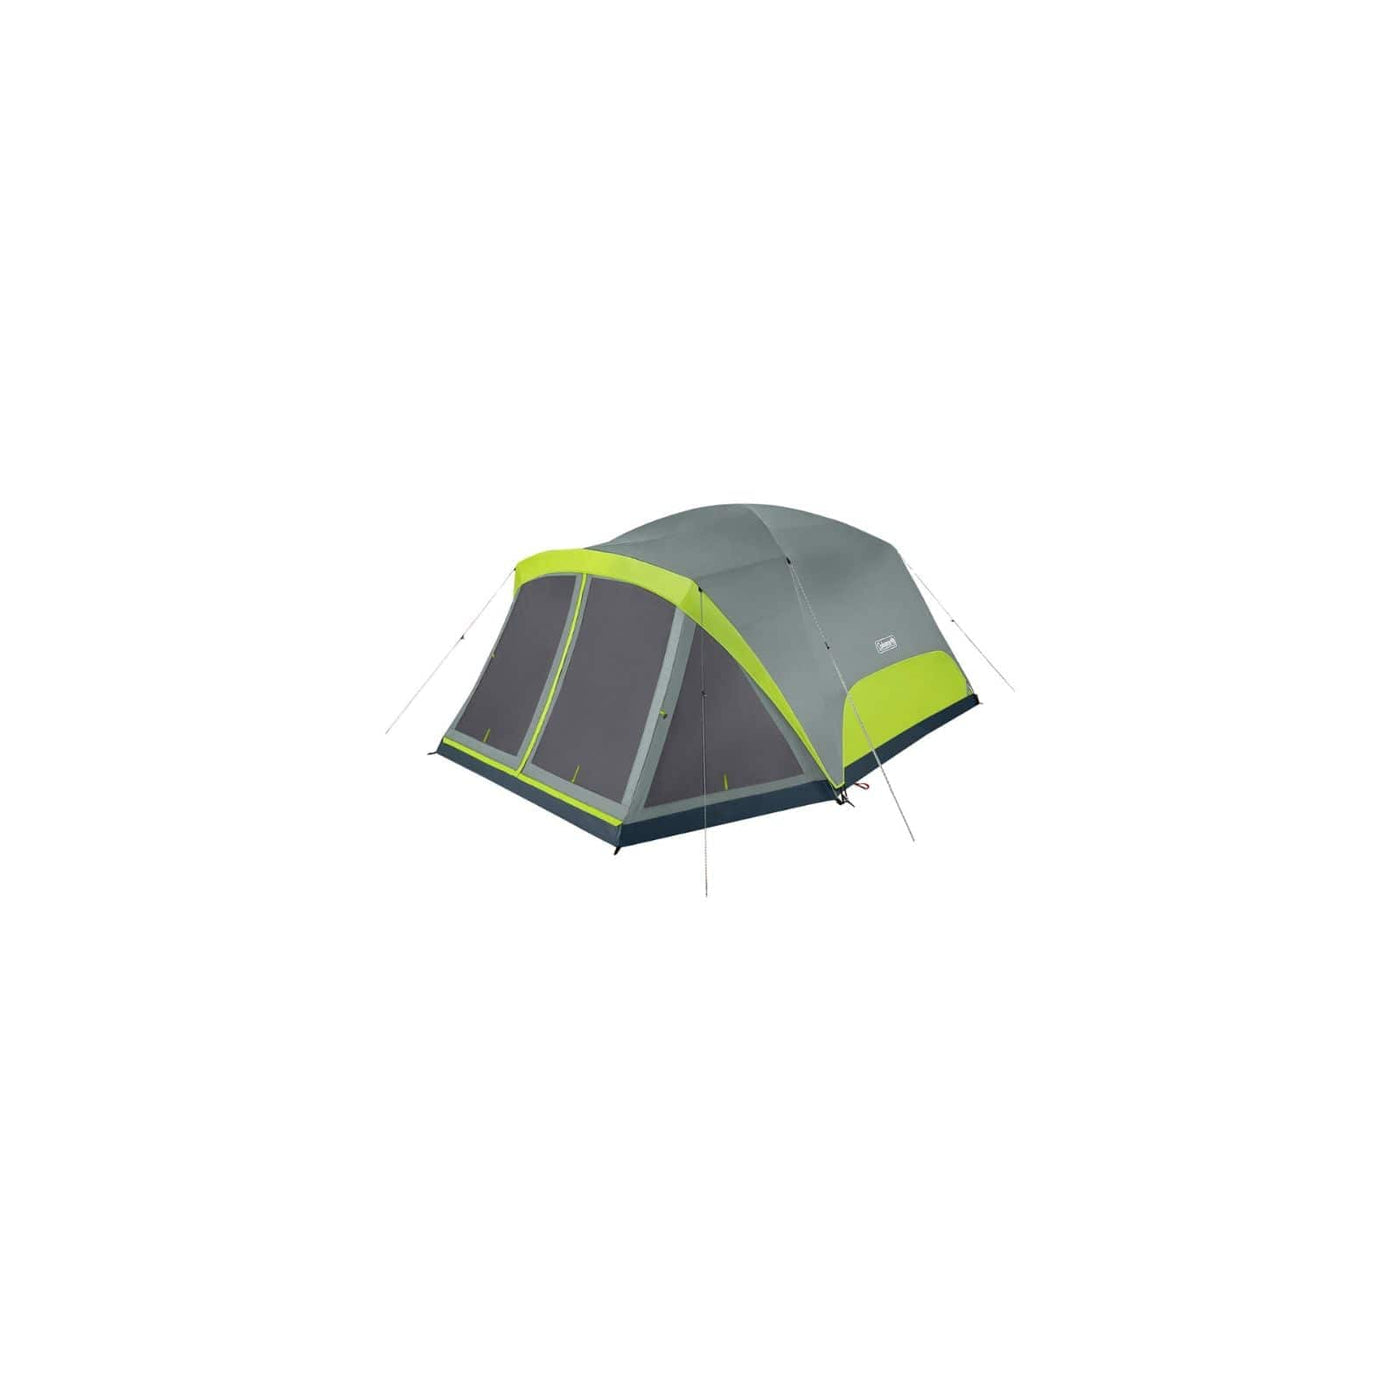 Coleman Coleman Skydome Tent 8P Scrn Rm Rockgrey C001 Camping And Outdoor